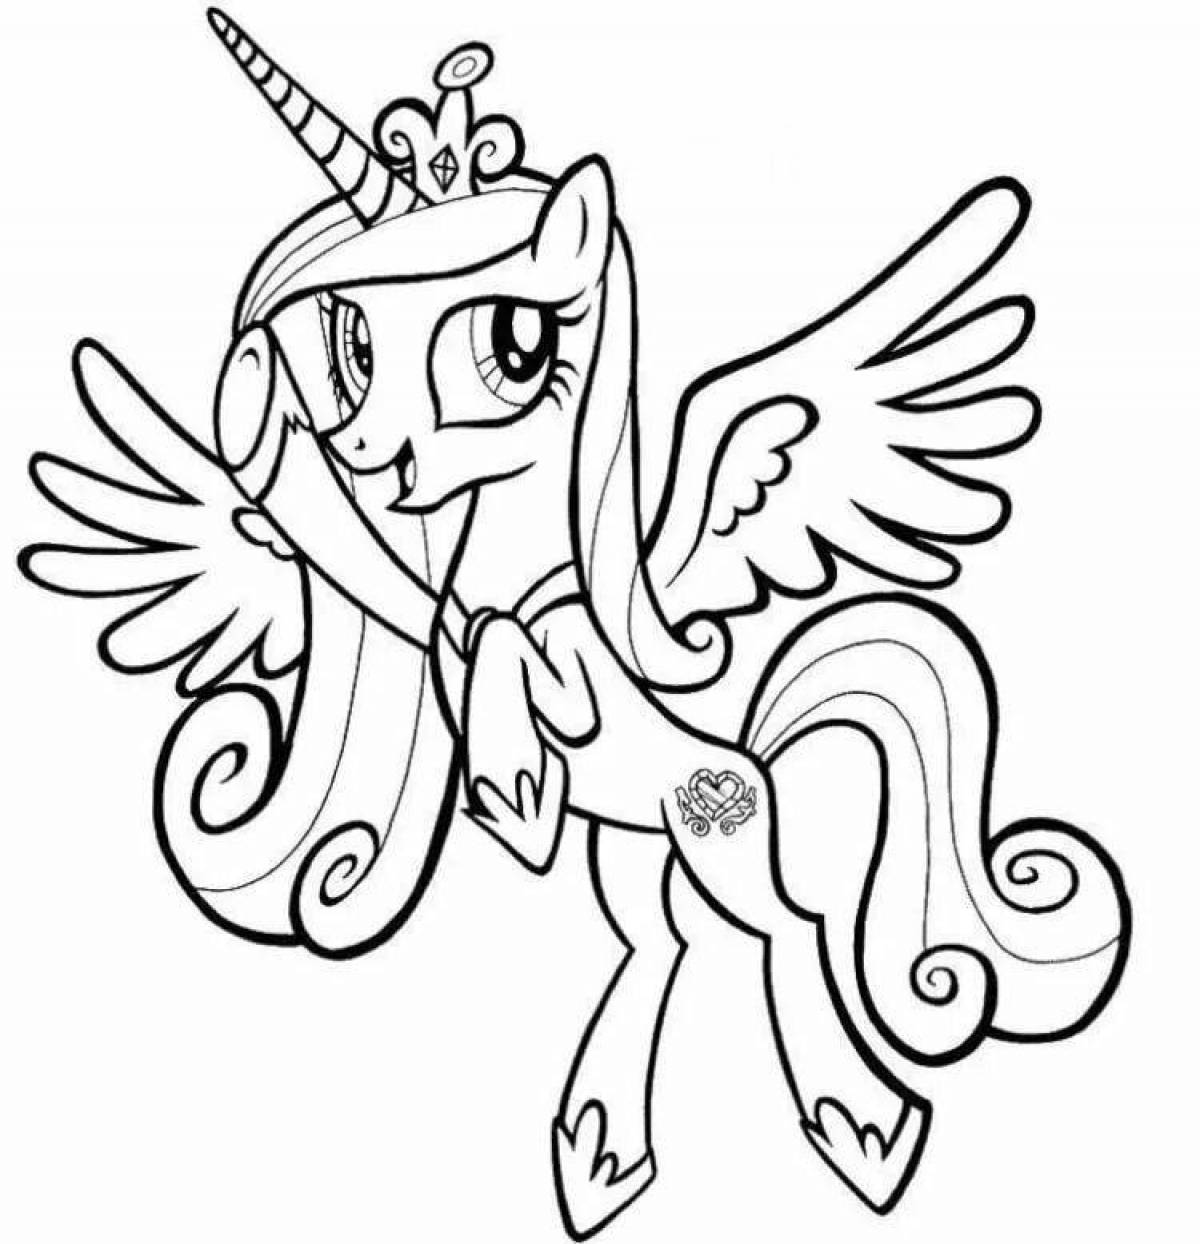 Dazzling pony light coloring page